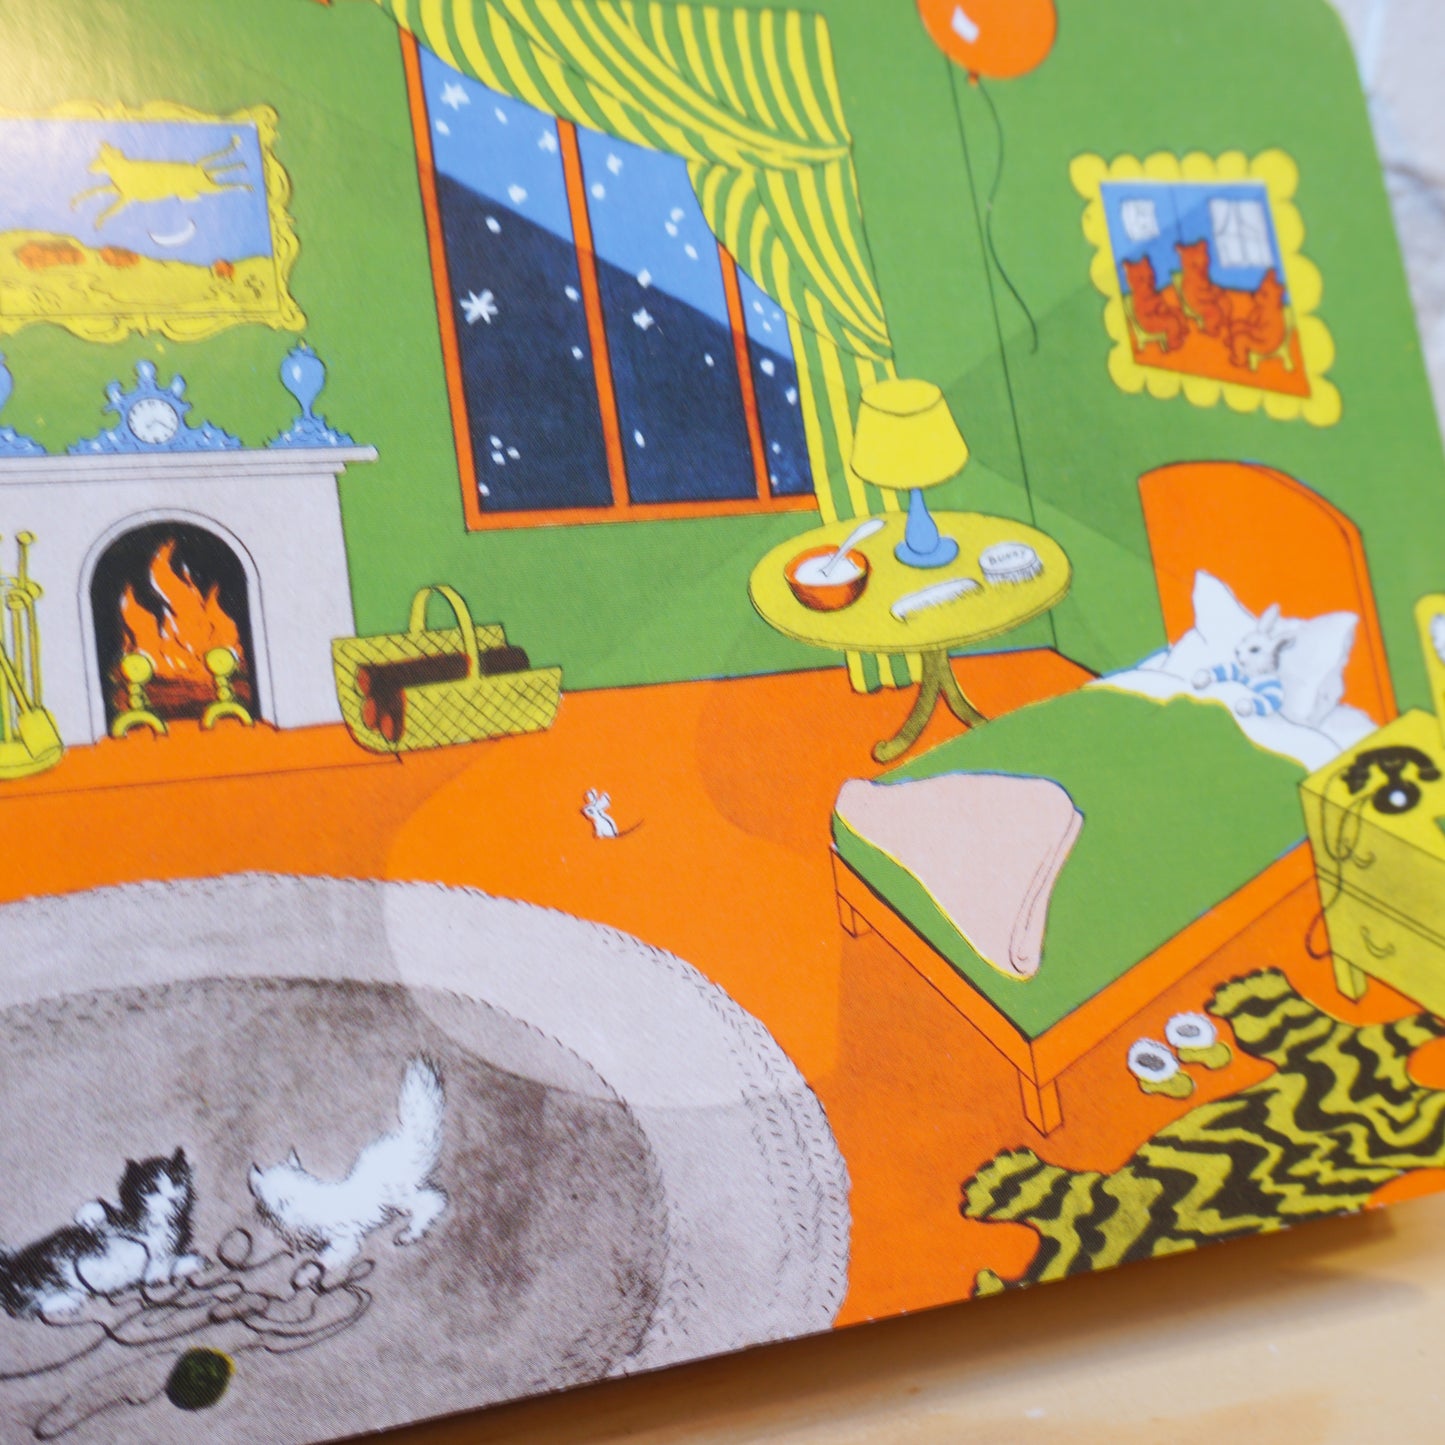 Goodnight Moon – Margaret Wise Brown, Clement Hurd